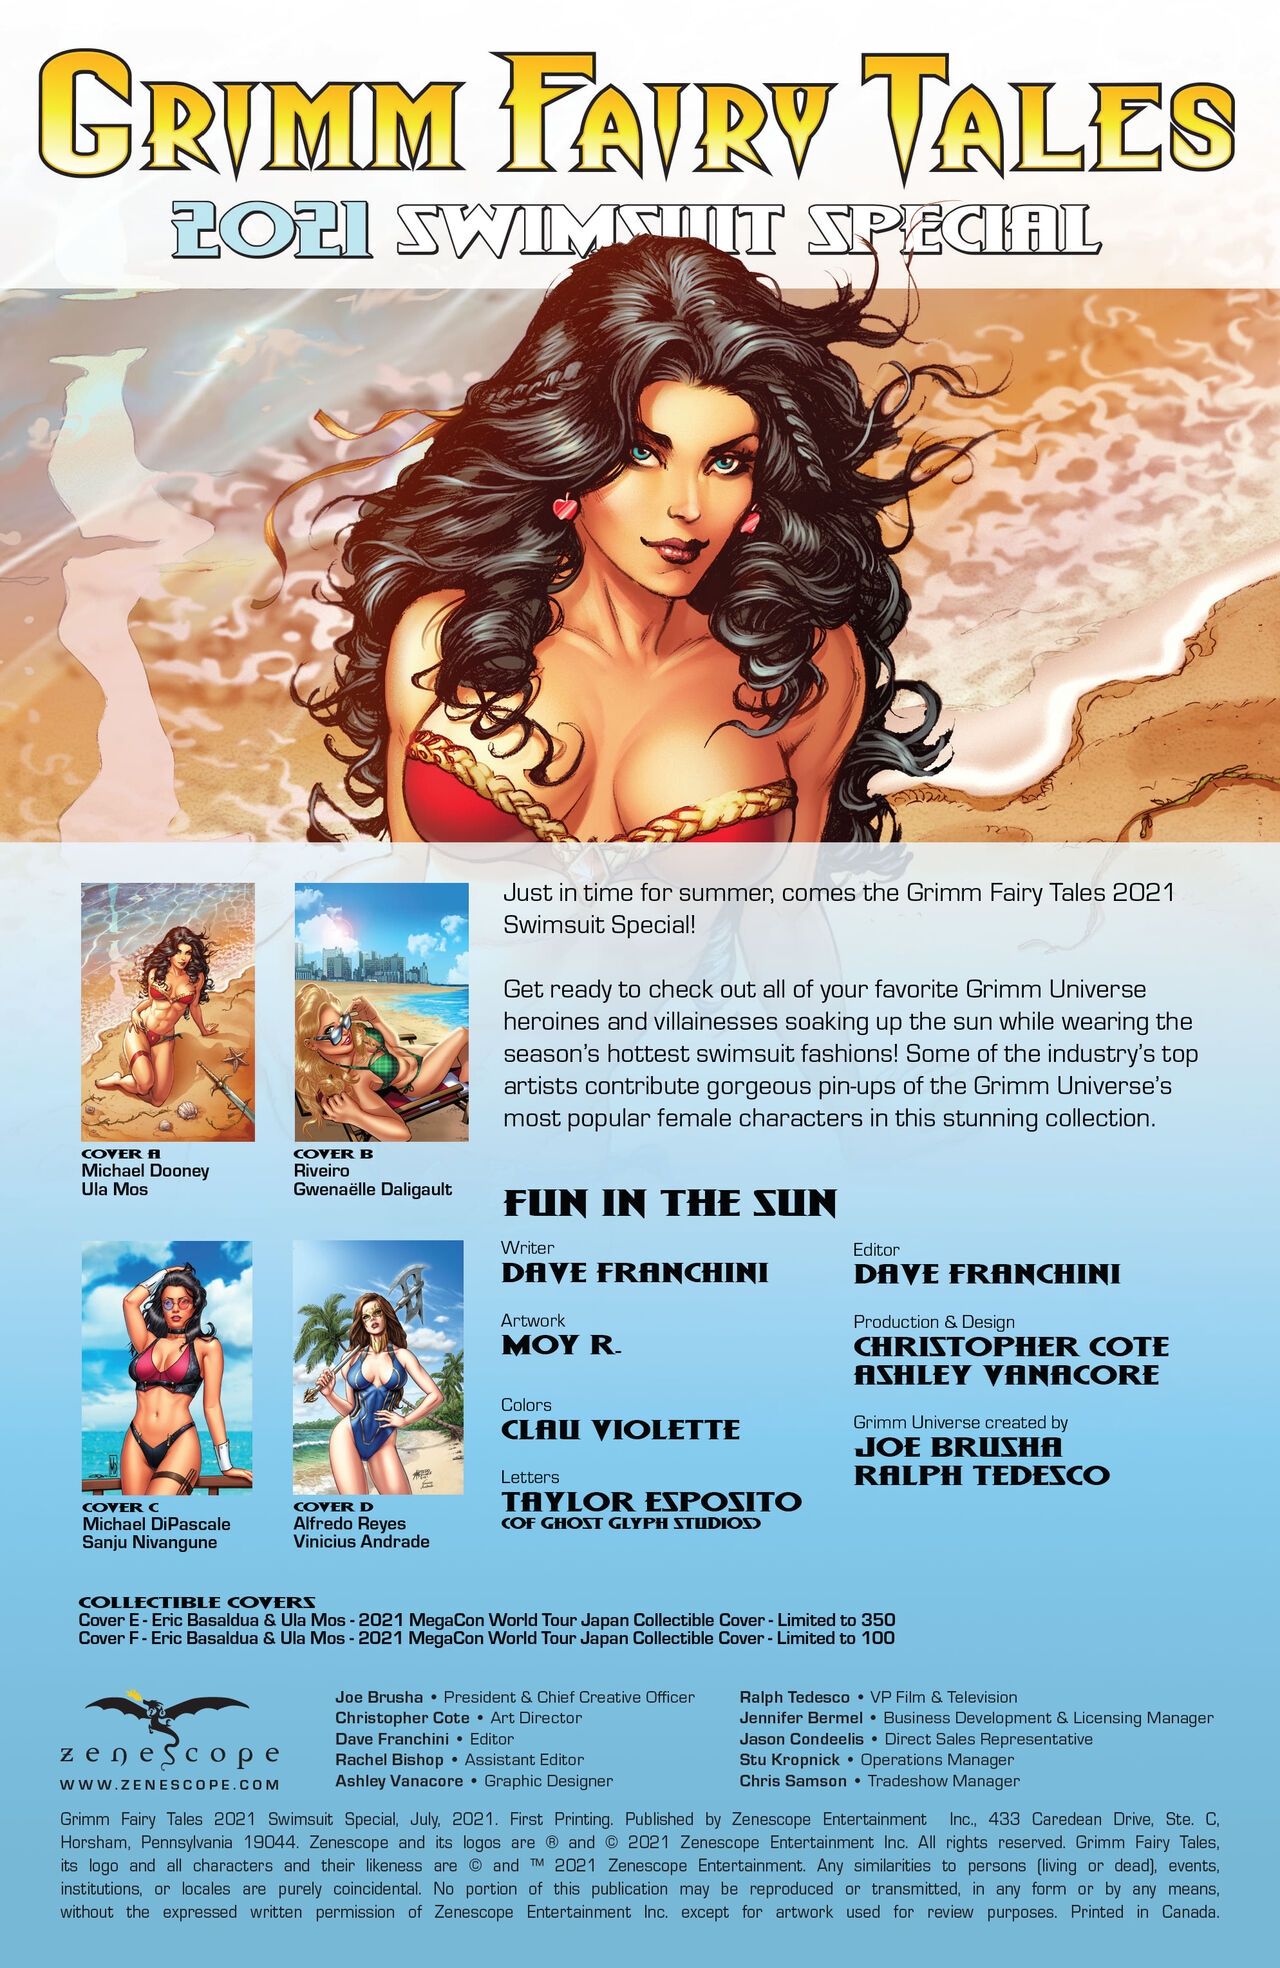 Grimm Fairy Tales 2021 Swimsuit Special 1